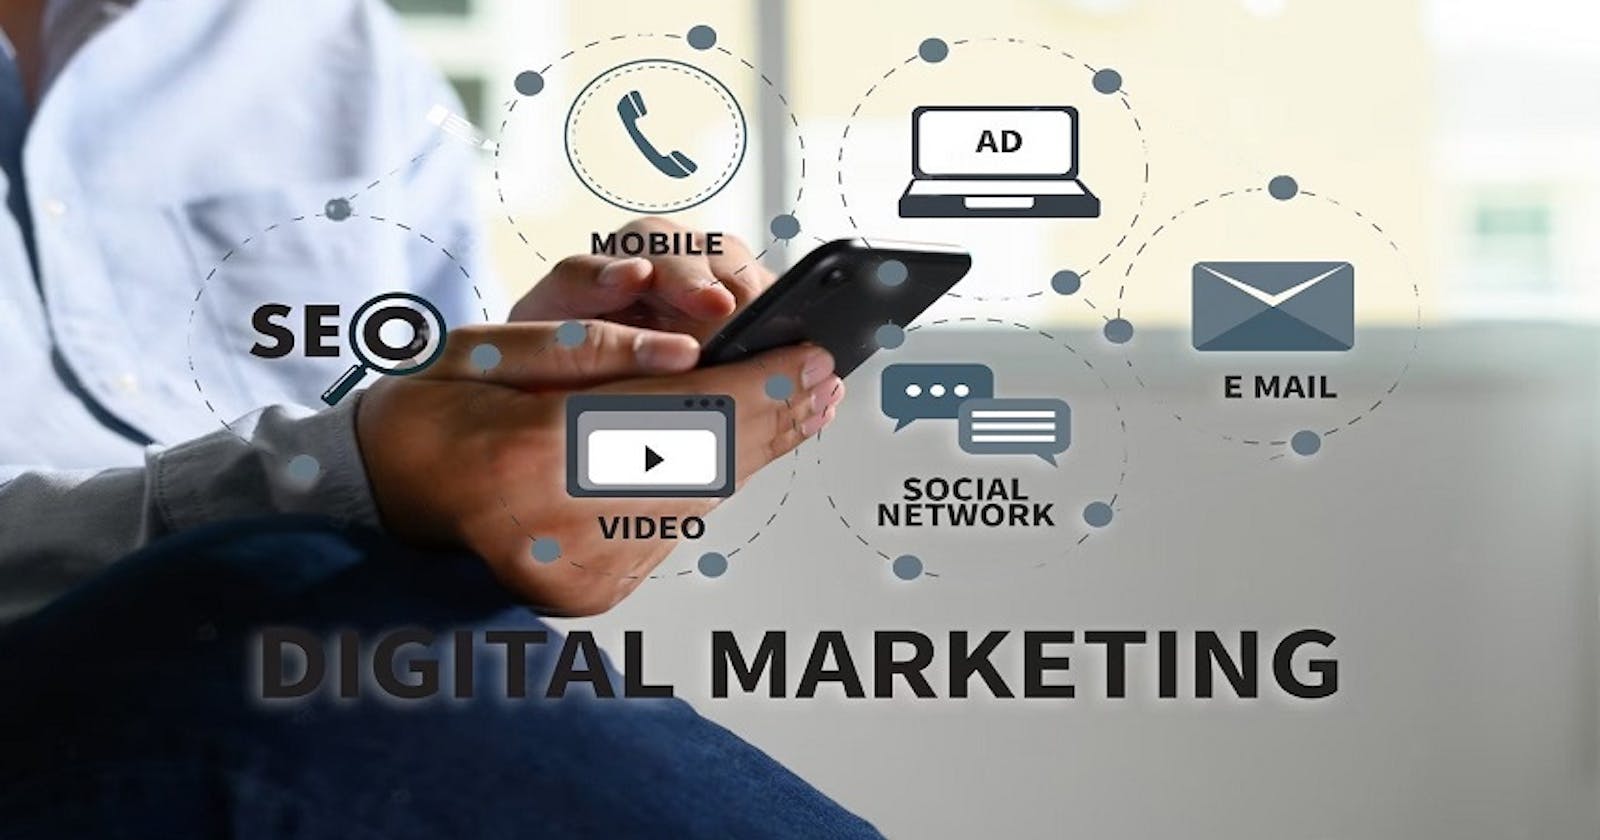 Digital Marketing Services: How They Can Benefit Your Business